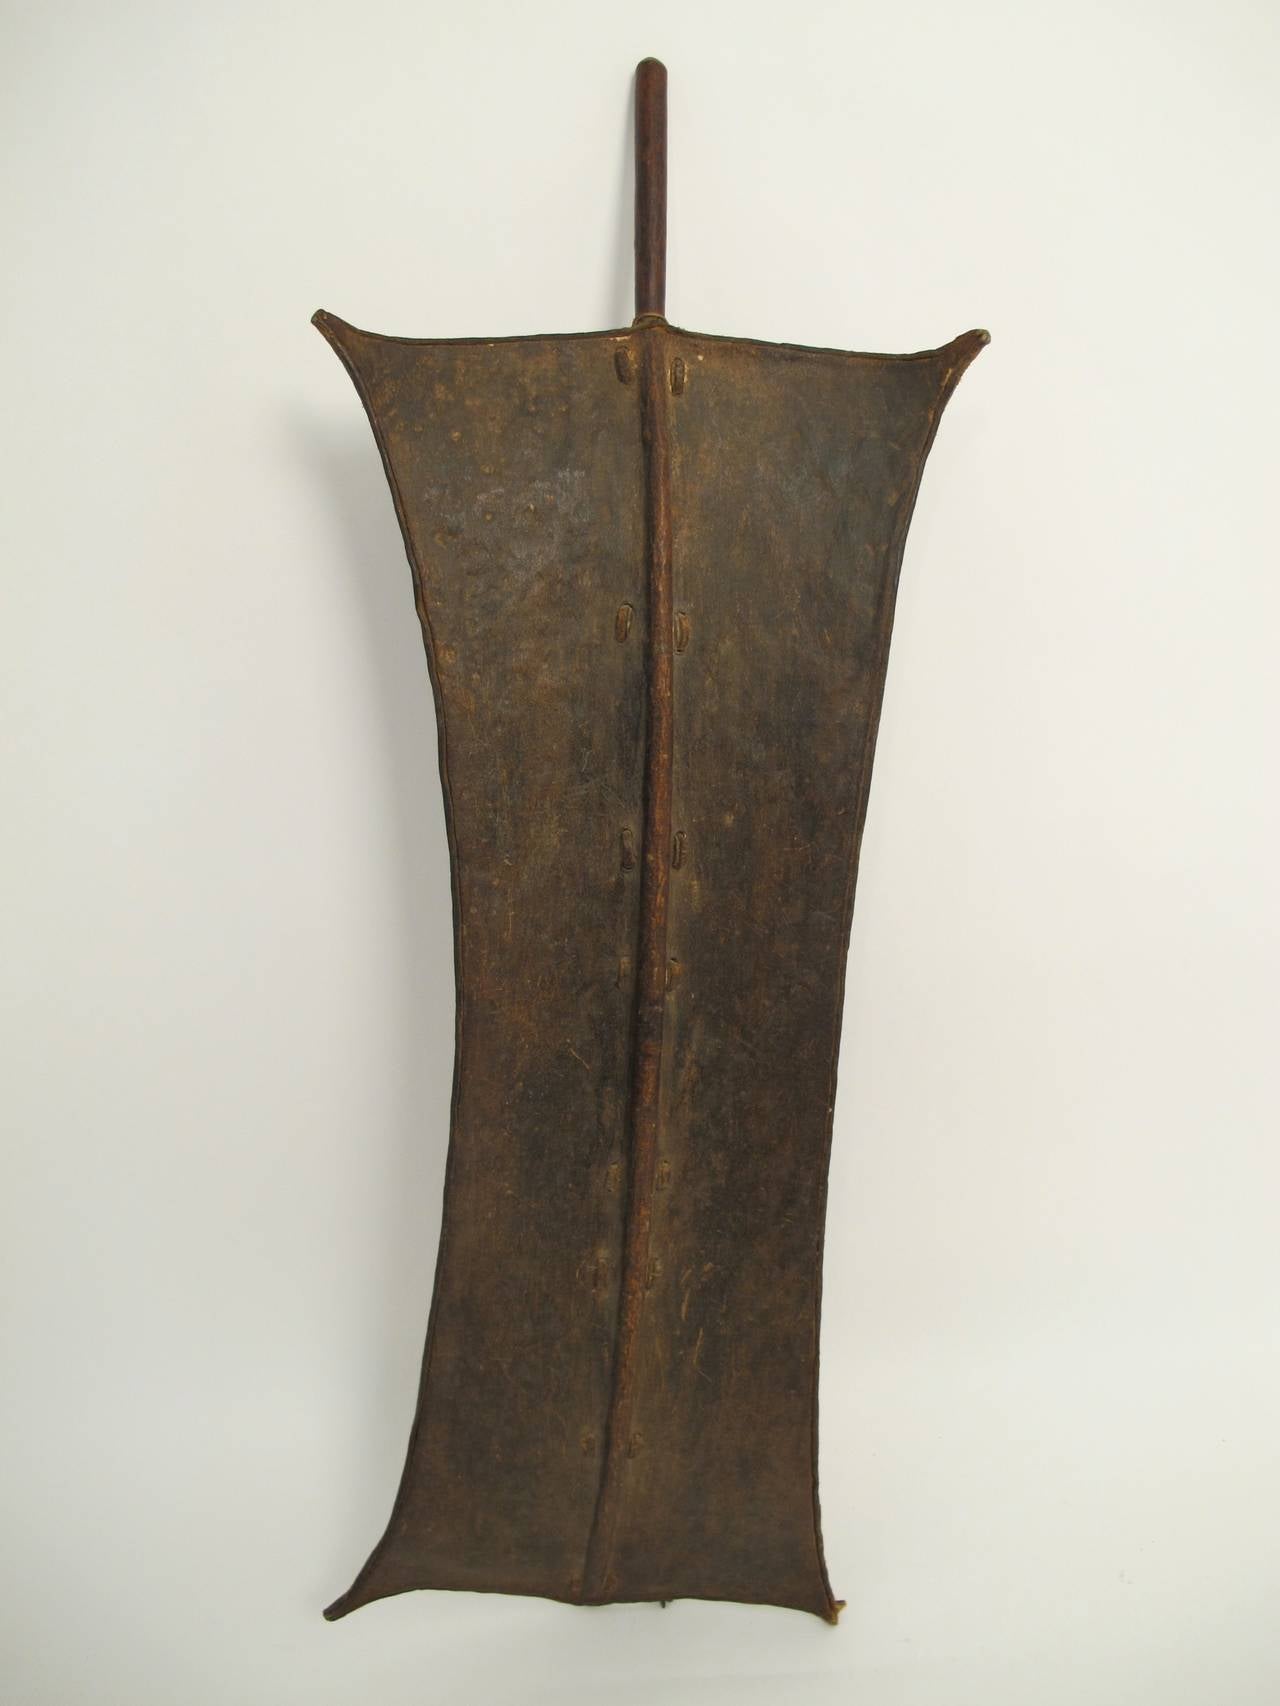 An early 20th century animal hide, wood and leather Toposa shield from Southern Sudan.